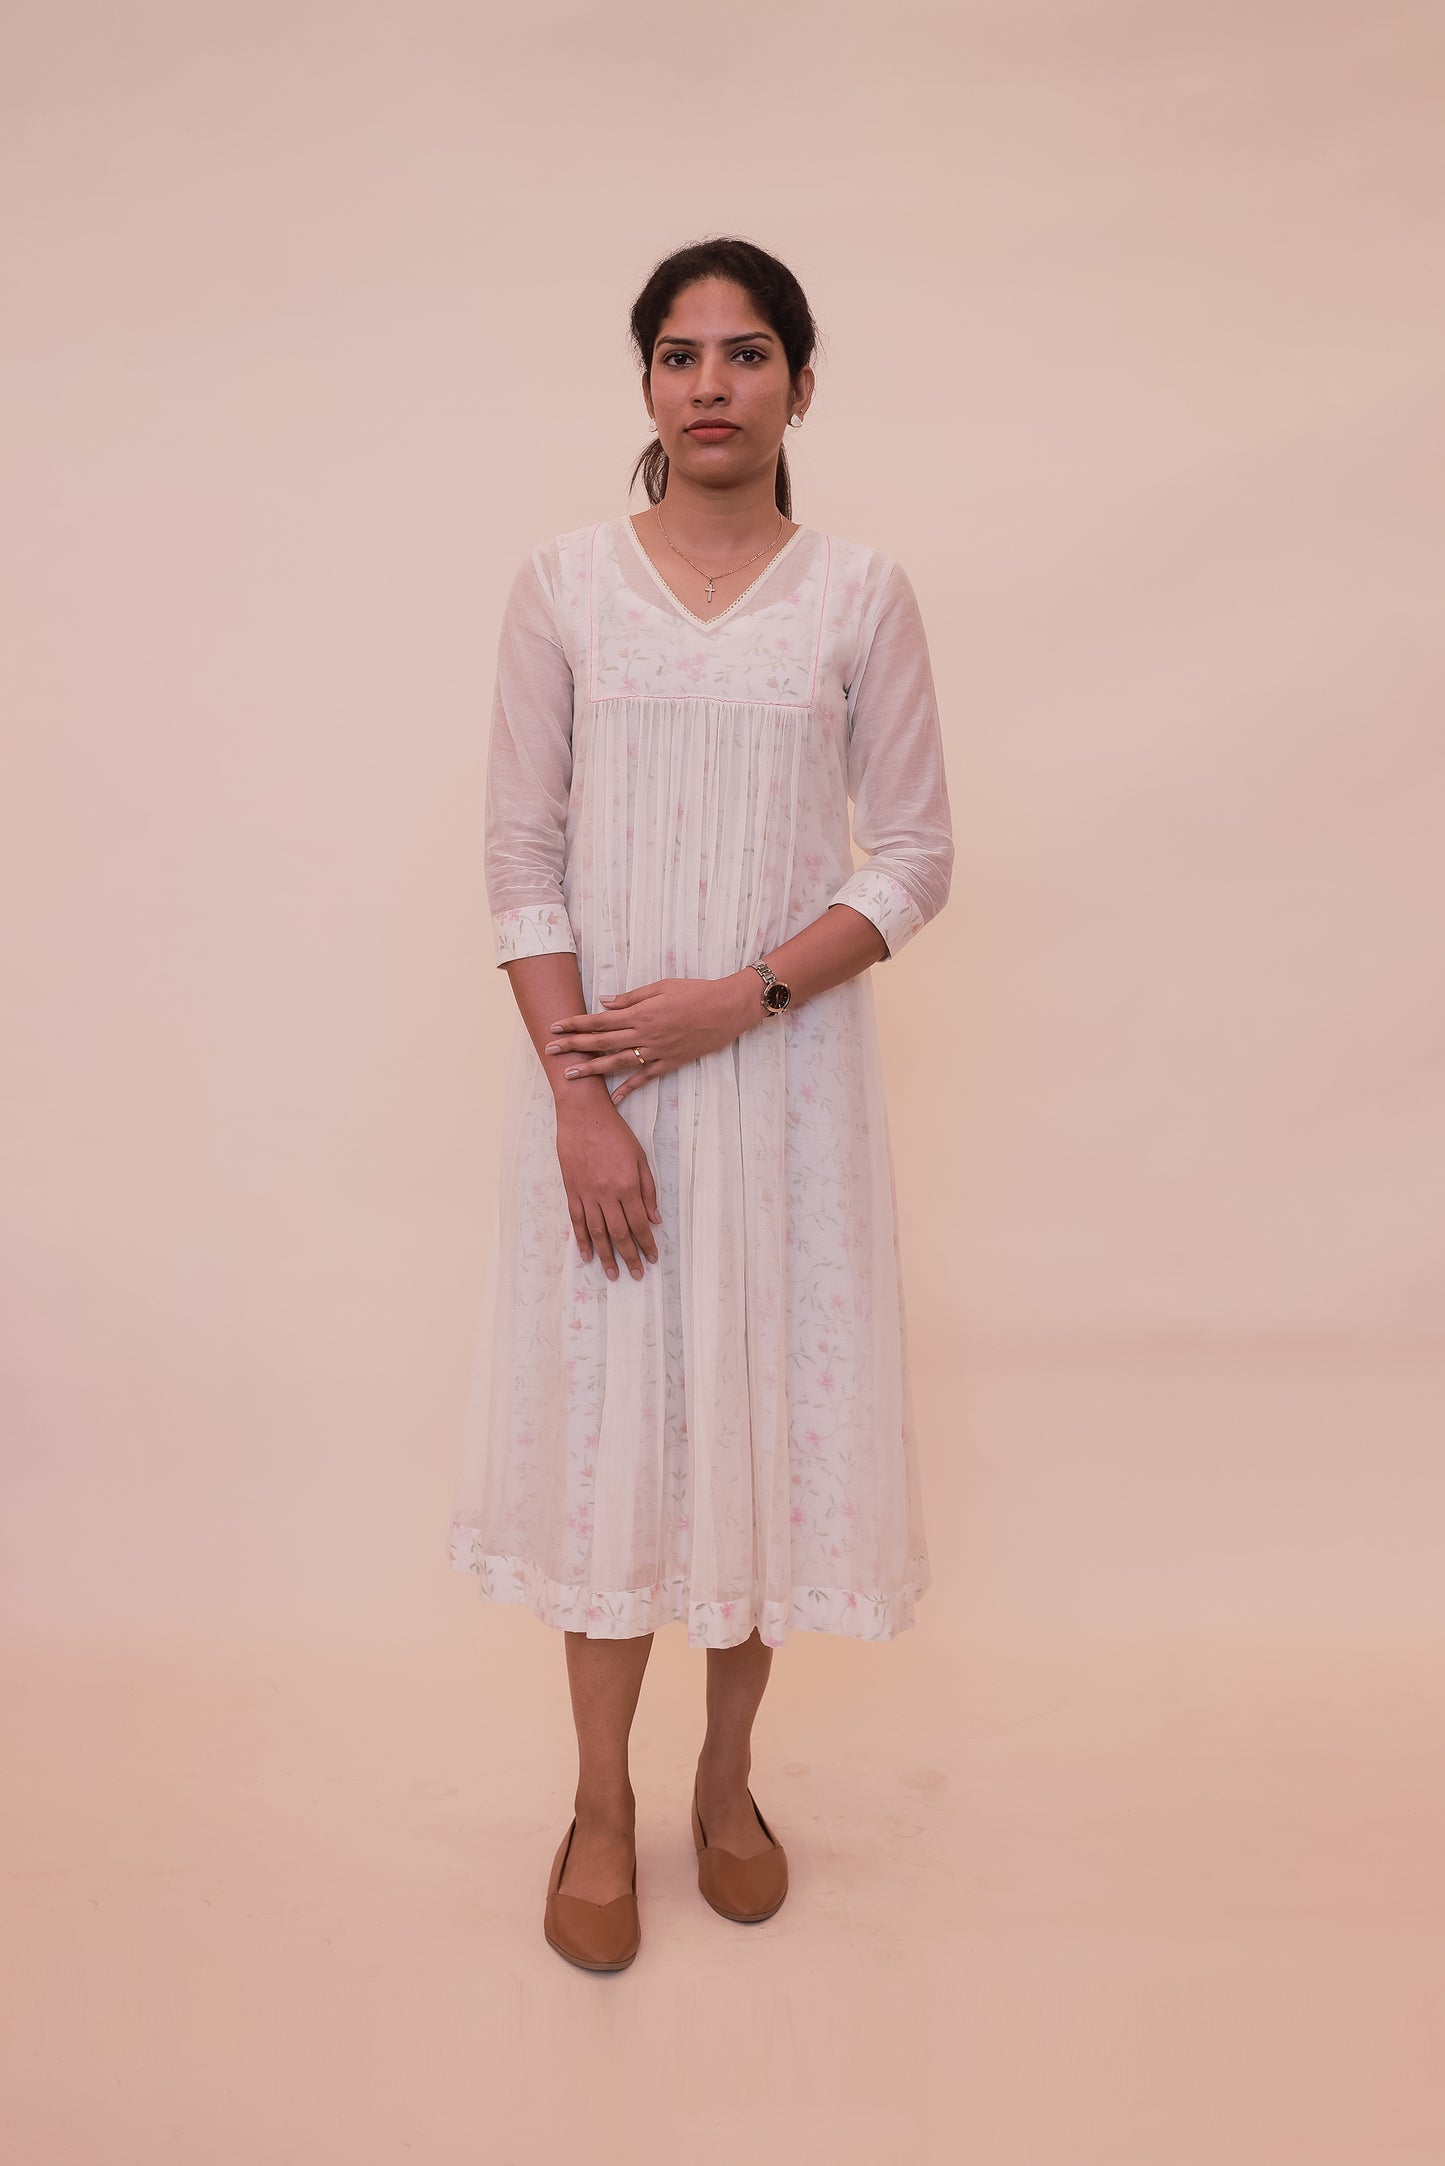 White Chanderi dress with floral inner